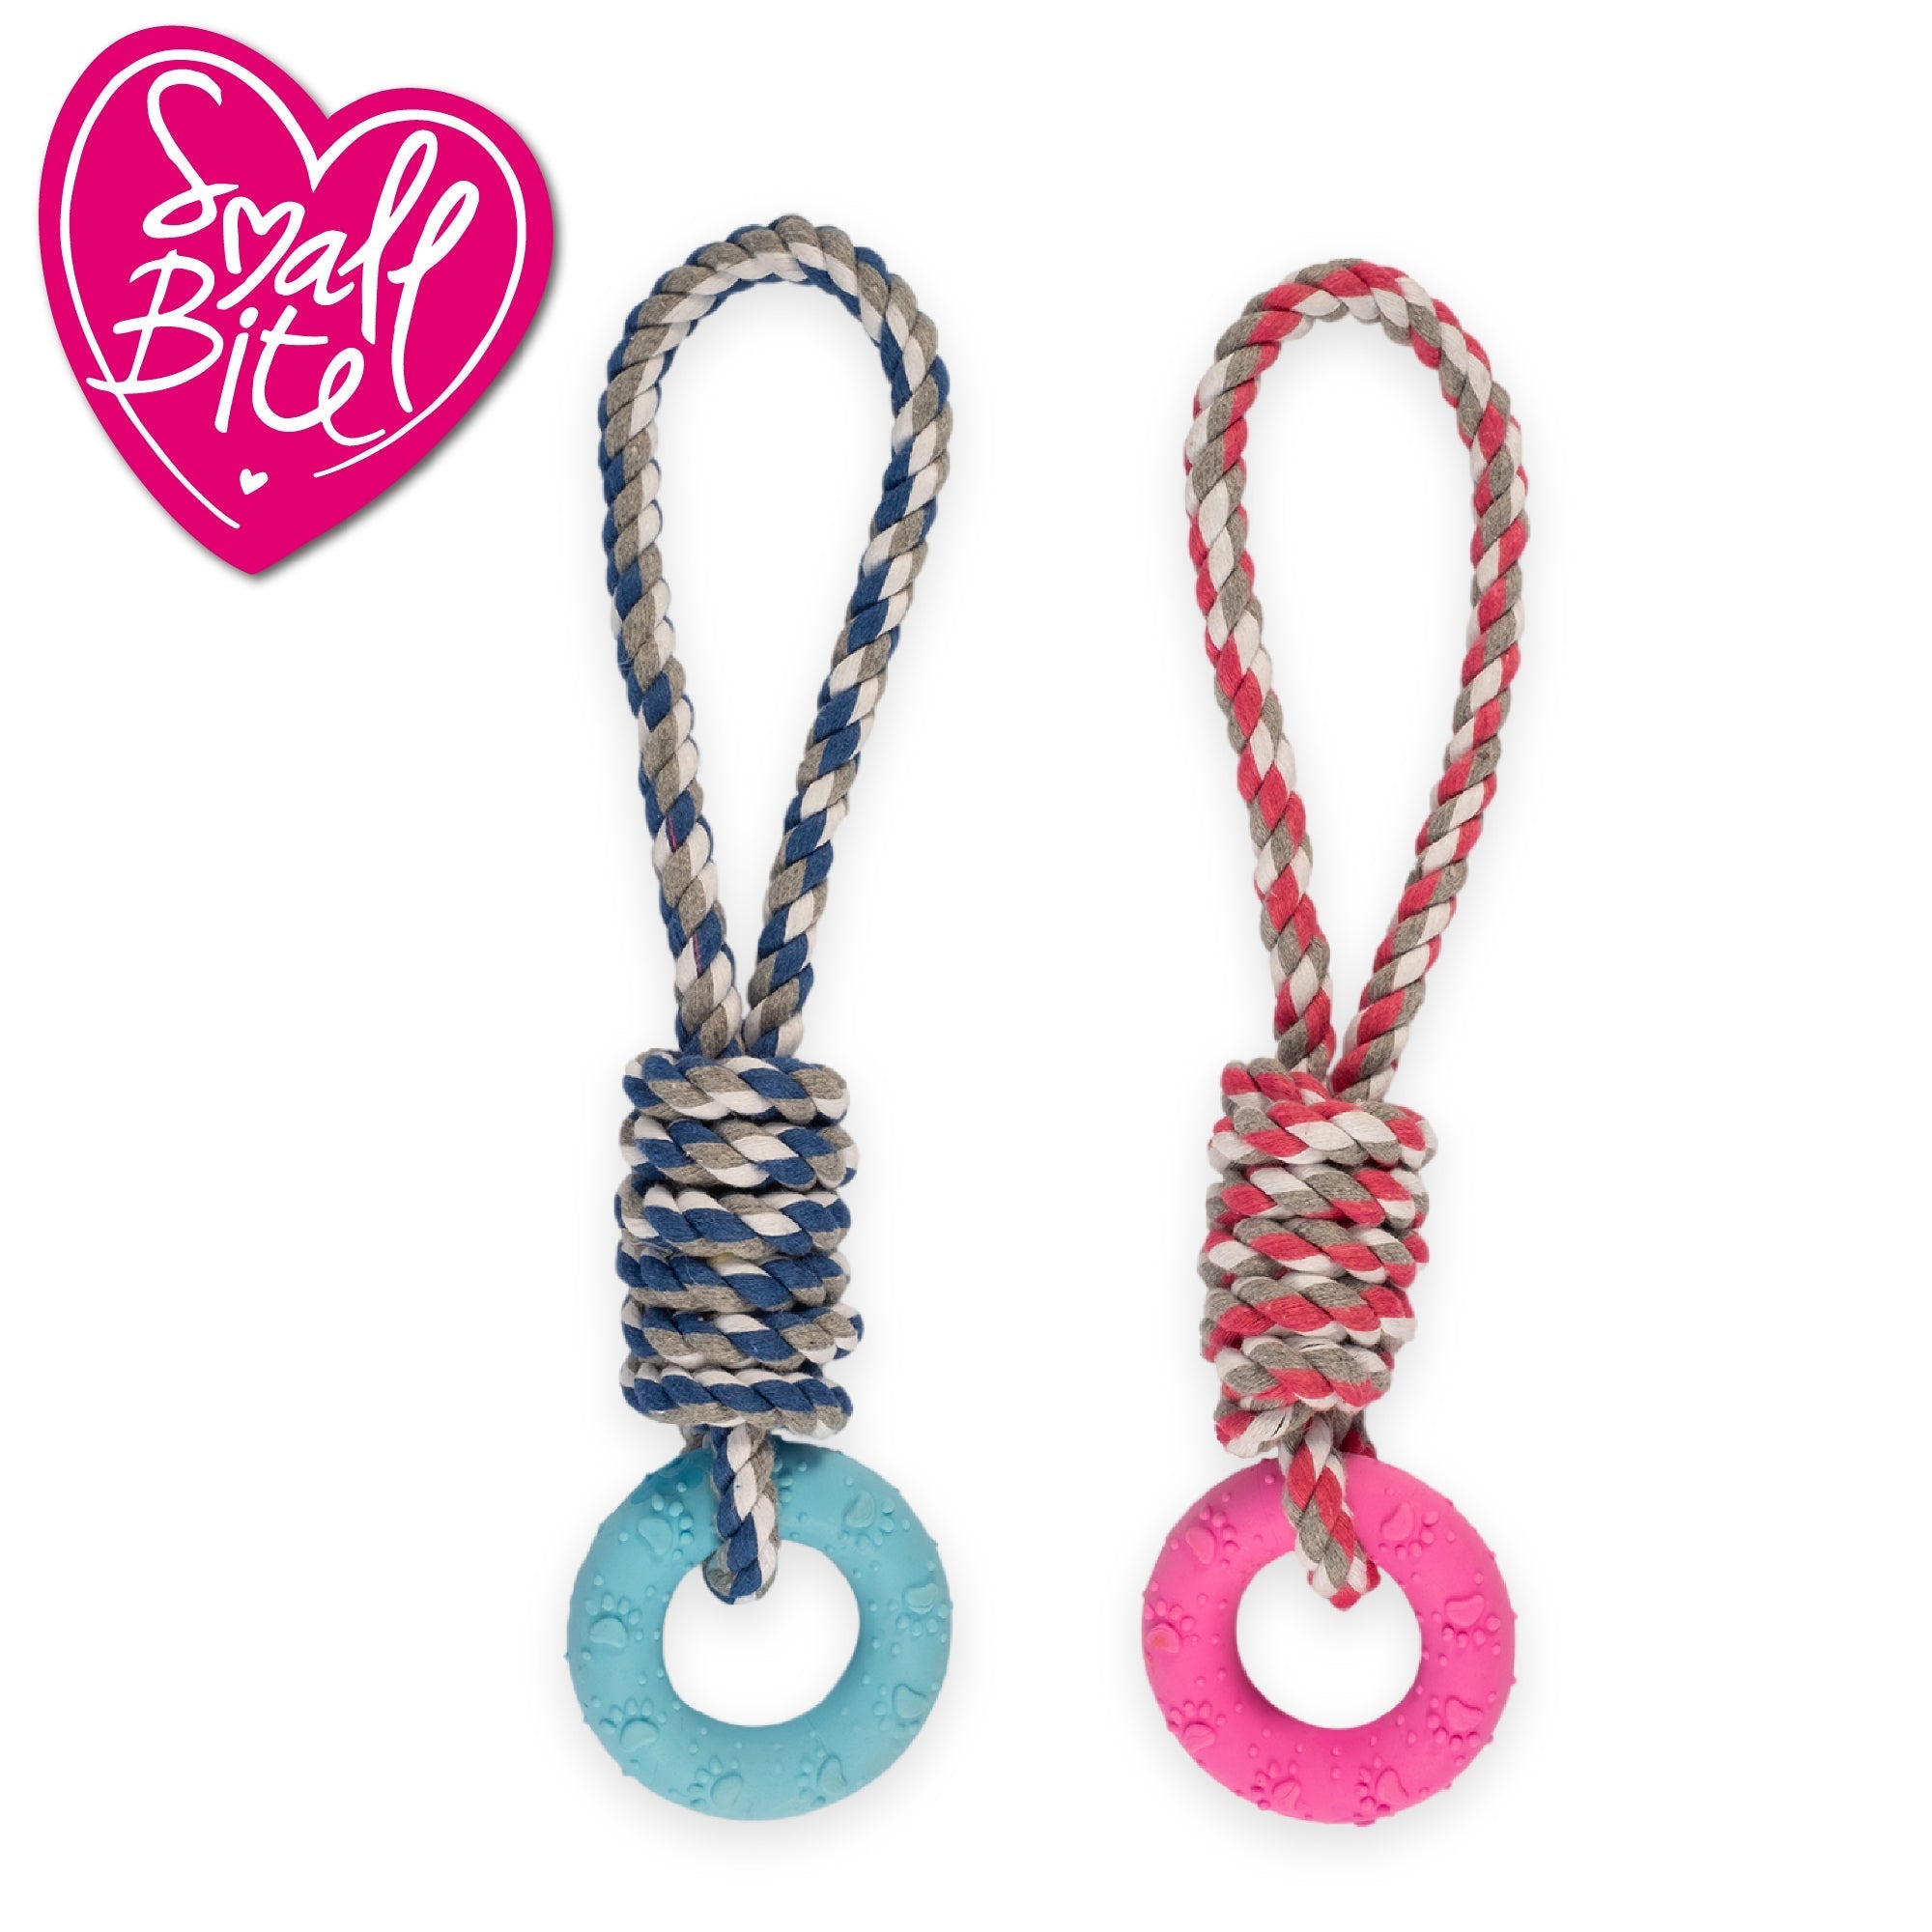 Ancol Small Bite Rope & Ring Puppy Toy, Ancol,